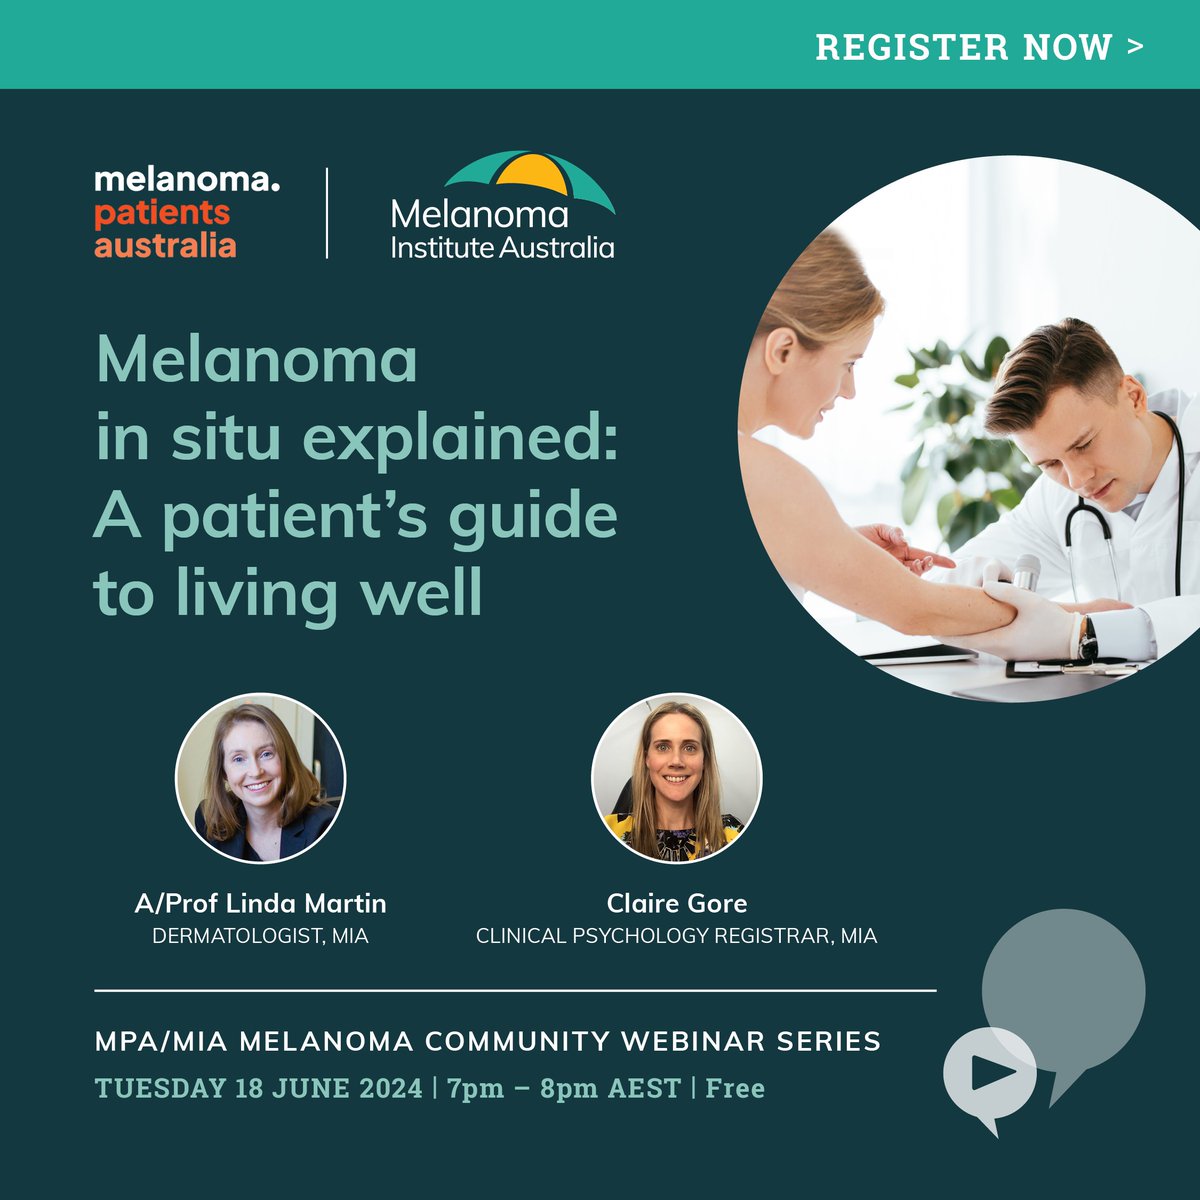 #Melanoma patients & carers: Join MIA & @melanomasupport for informative series of webinars in June. Webinar 3 topic: 'Melanoma in situ explained: A patient’s guide to living well'. Presented by MIA's A/Prof Linda Martin & Claire Gore. See more & register> melanoma.org.au/event/mpa-mia-…